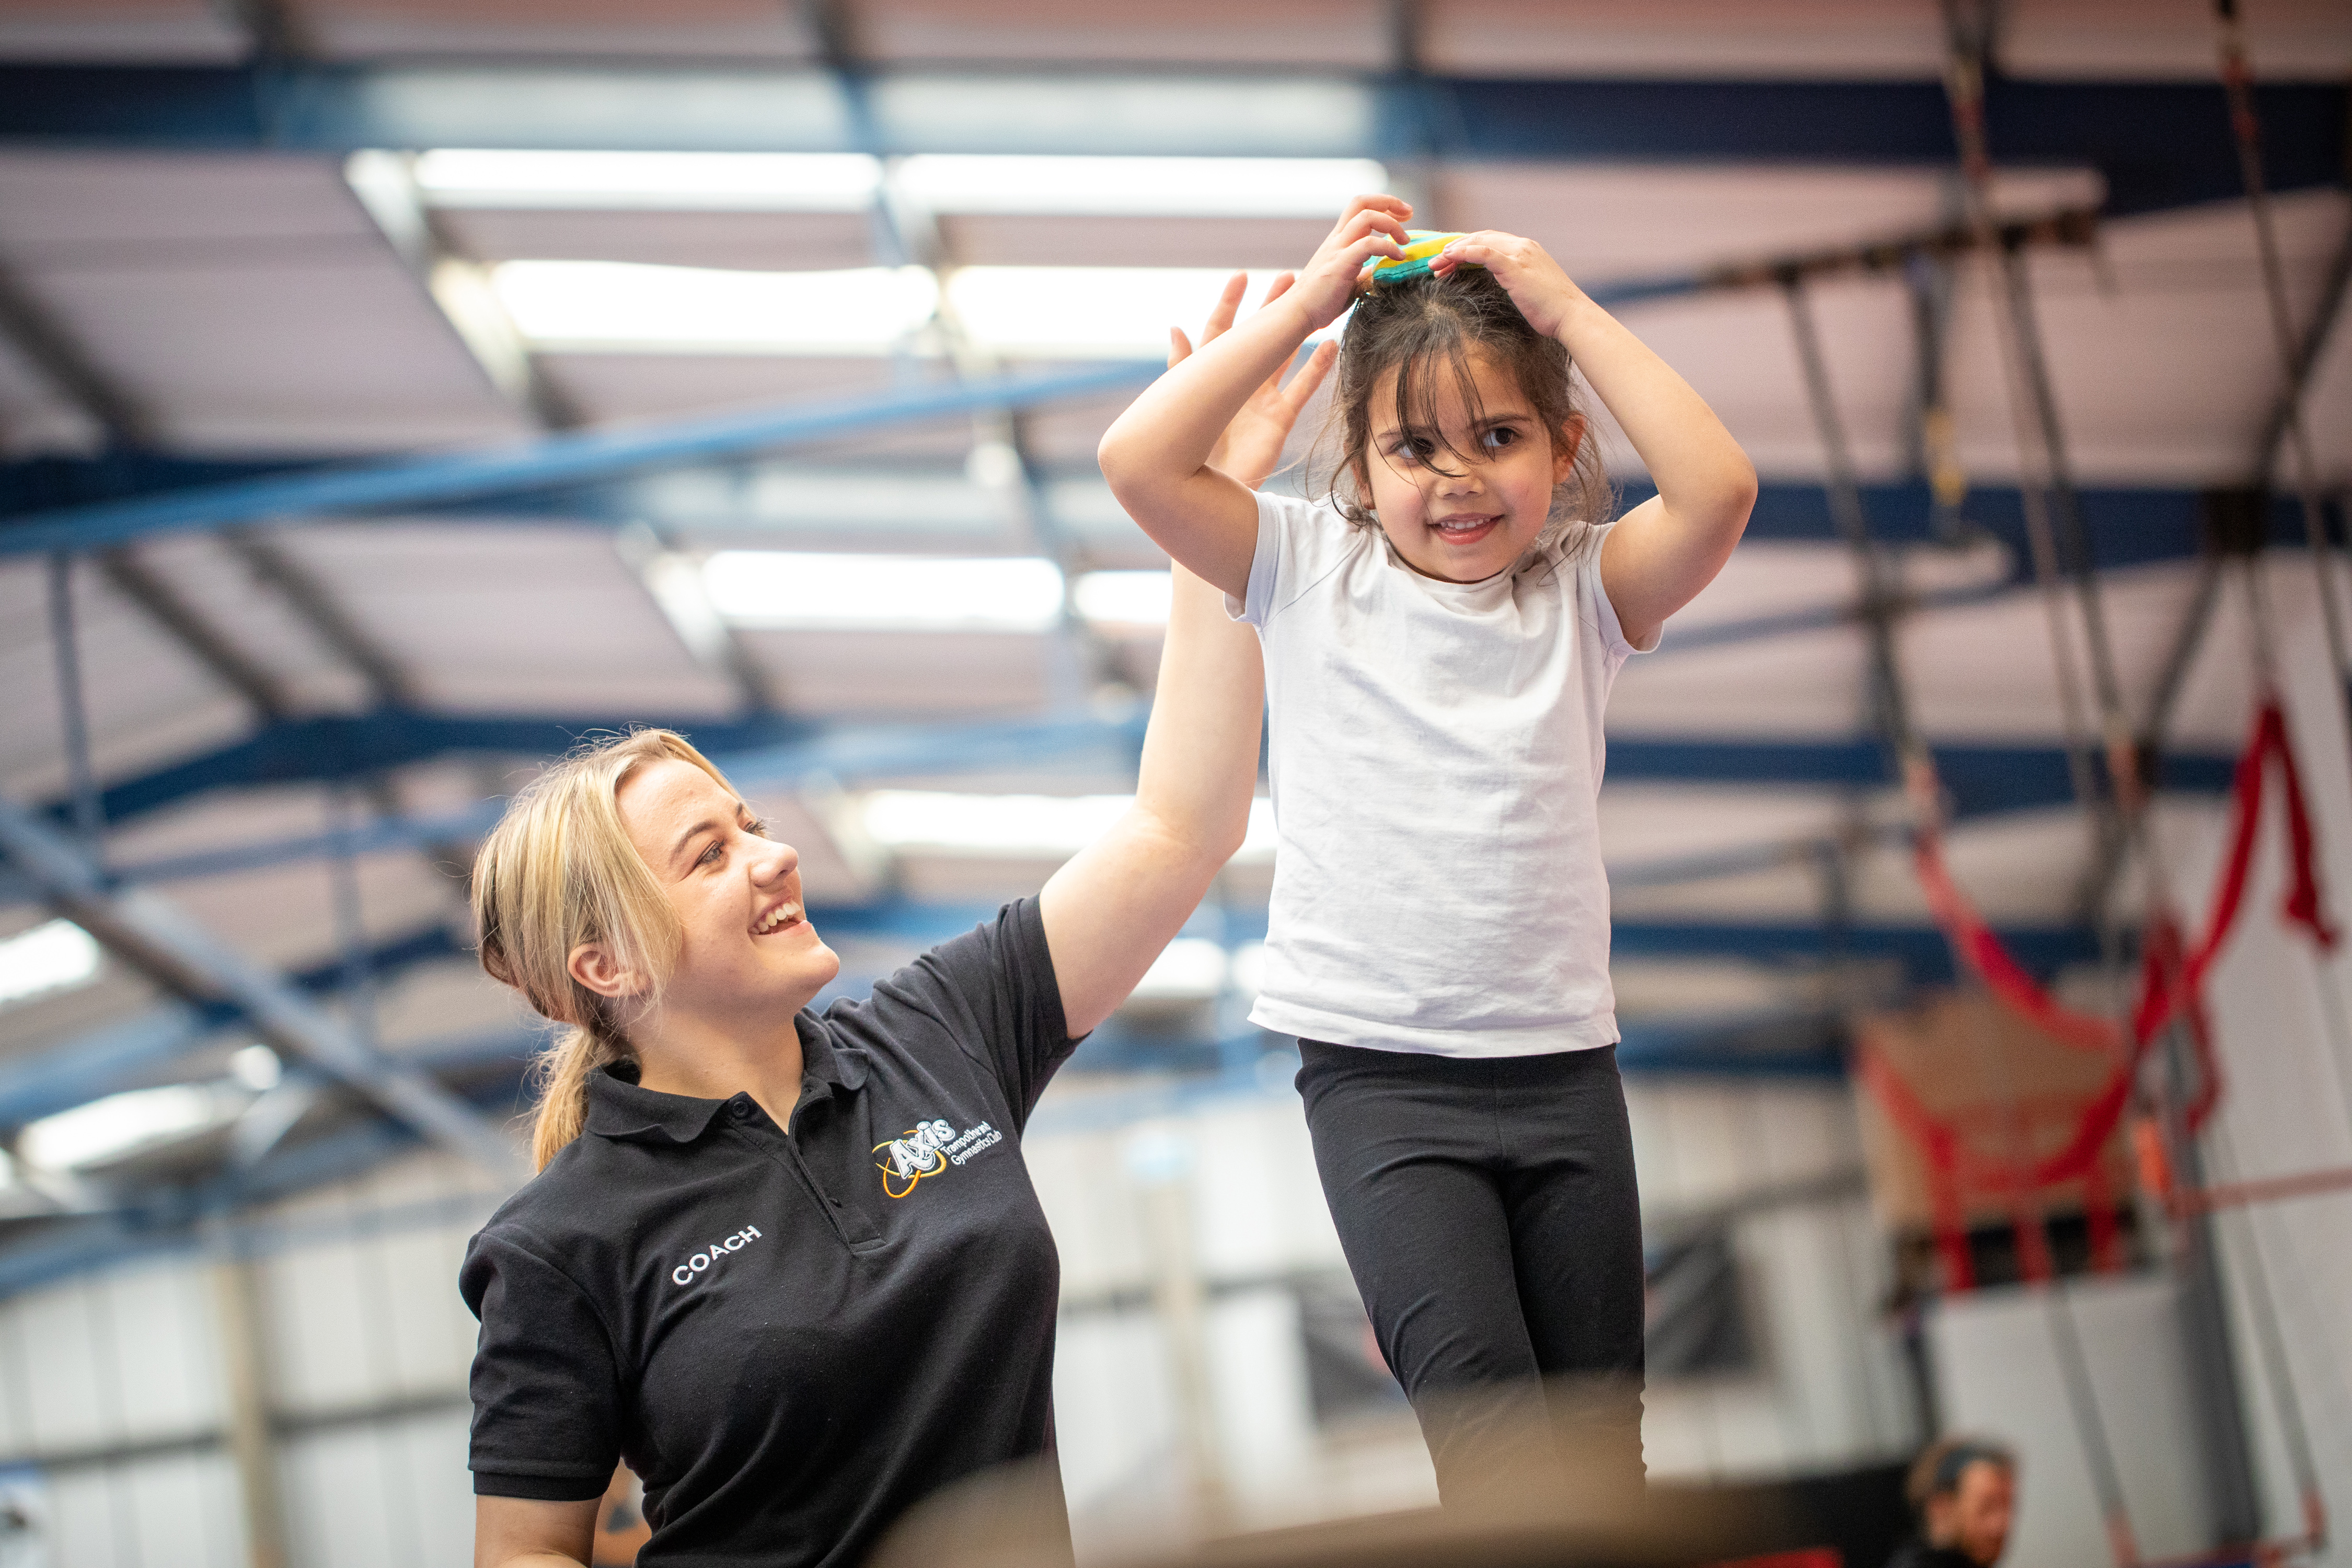 How to coach trampolining to kids - coach Hermione helps a girl with a balancing exercise